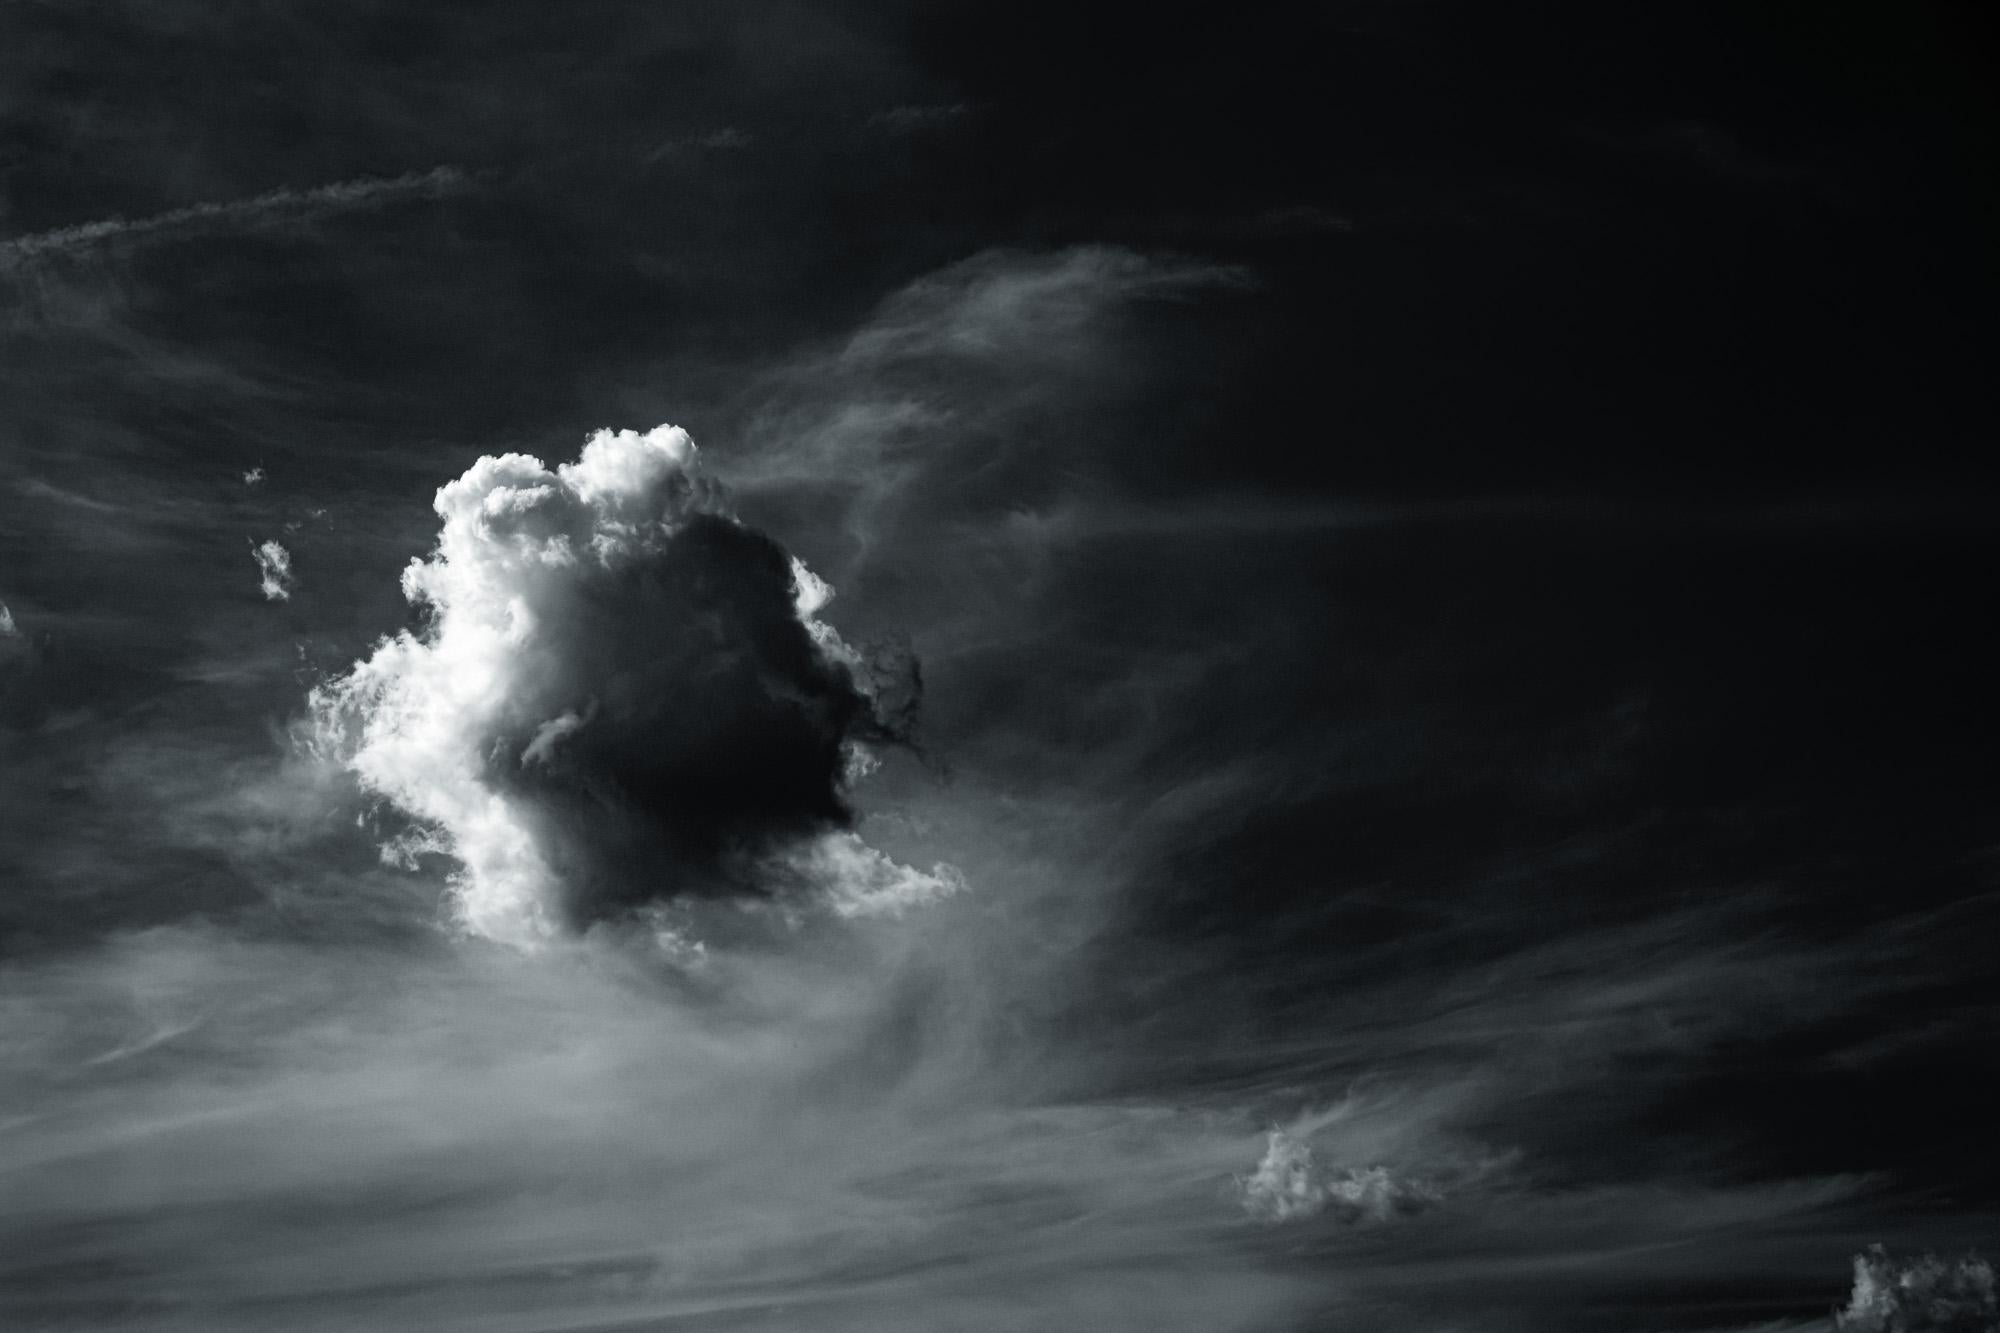 
Limited Edition Black and White Photograph Clouds and Light. This is image is "Light Push" from the Aerials series.

I’ve long been fascinated by weather and most recently climate change science. My deepening knowledge of climate change has